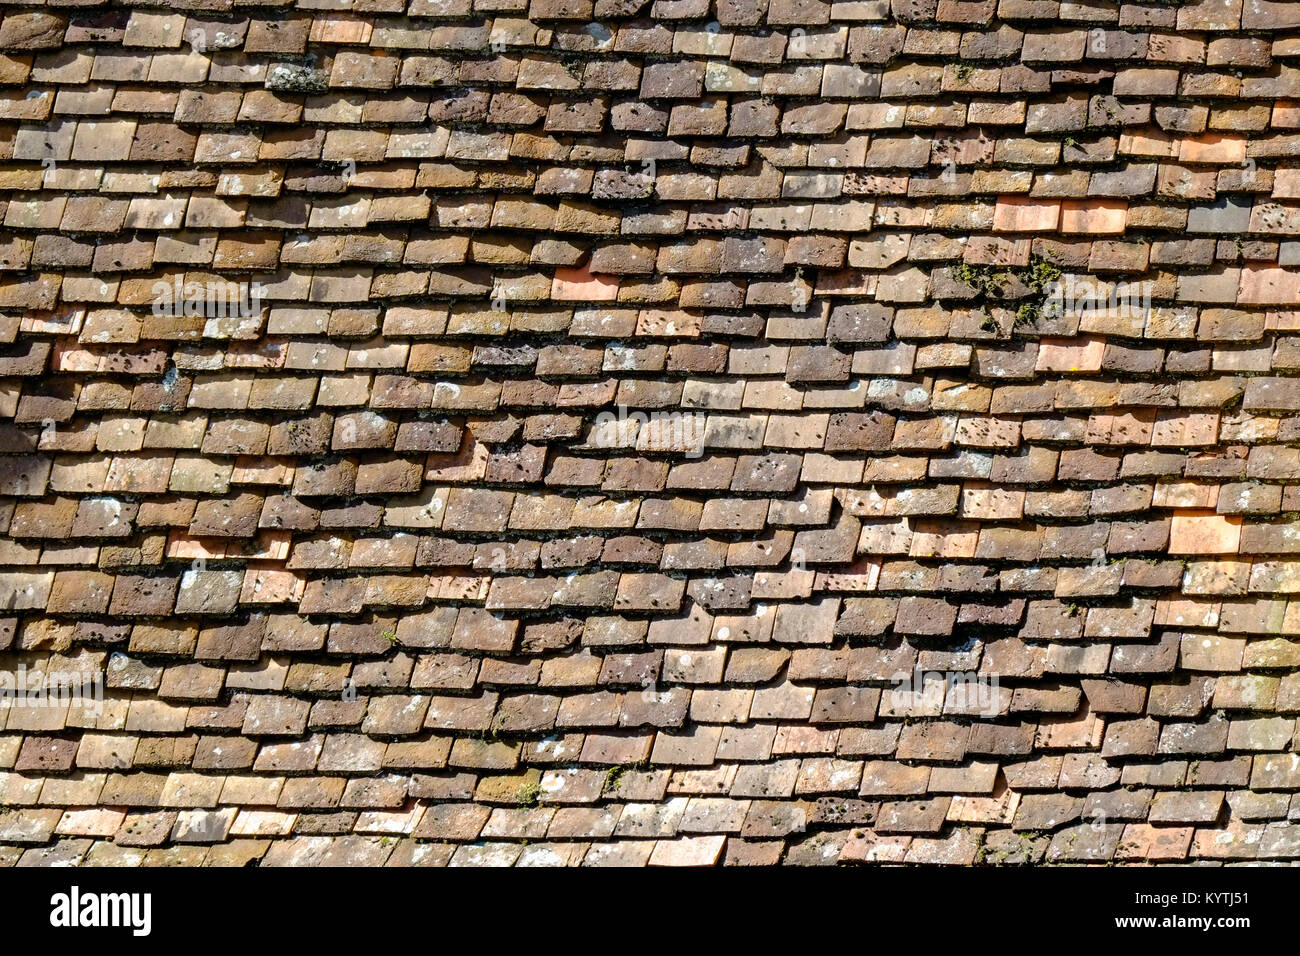 Old red roof tile background pattern Stock Photo